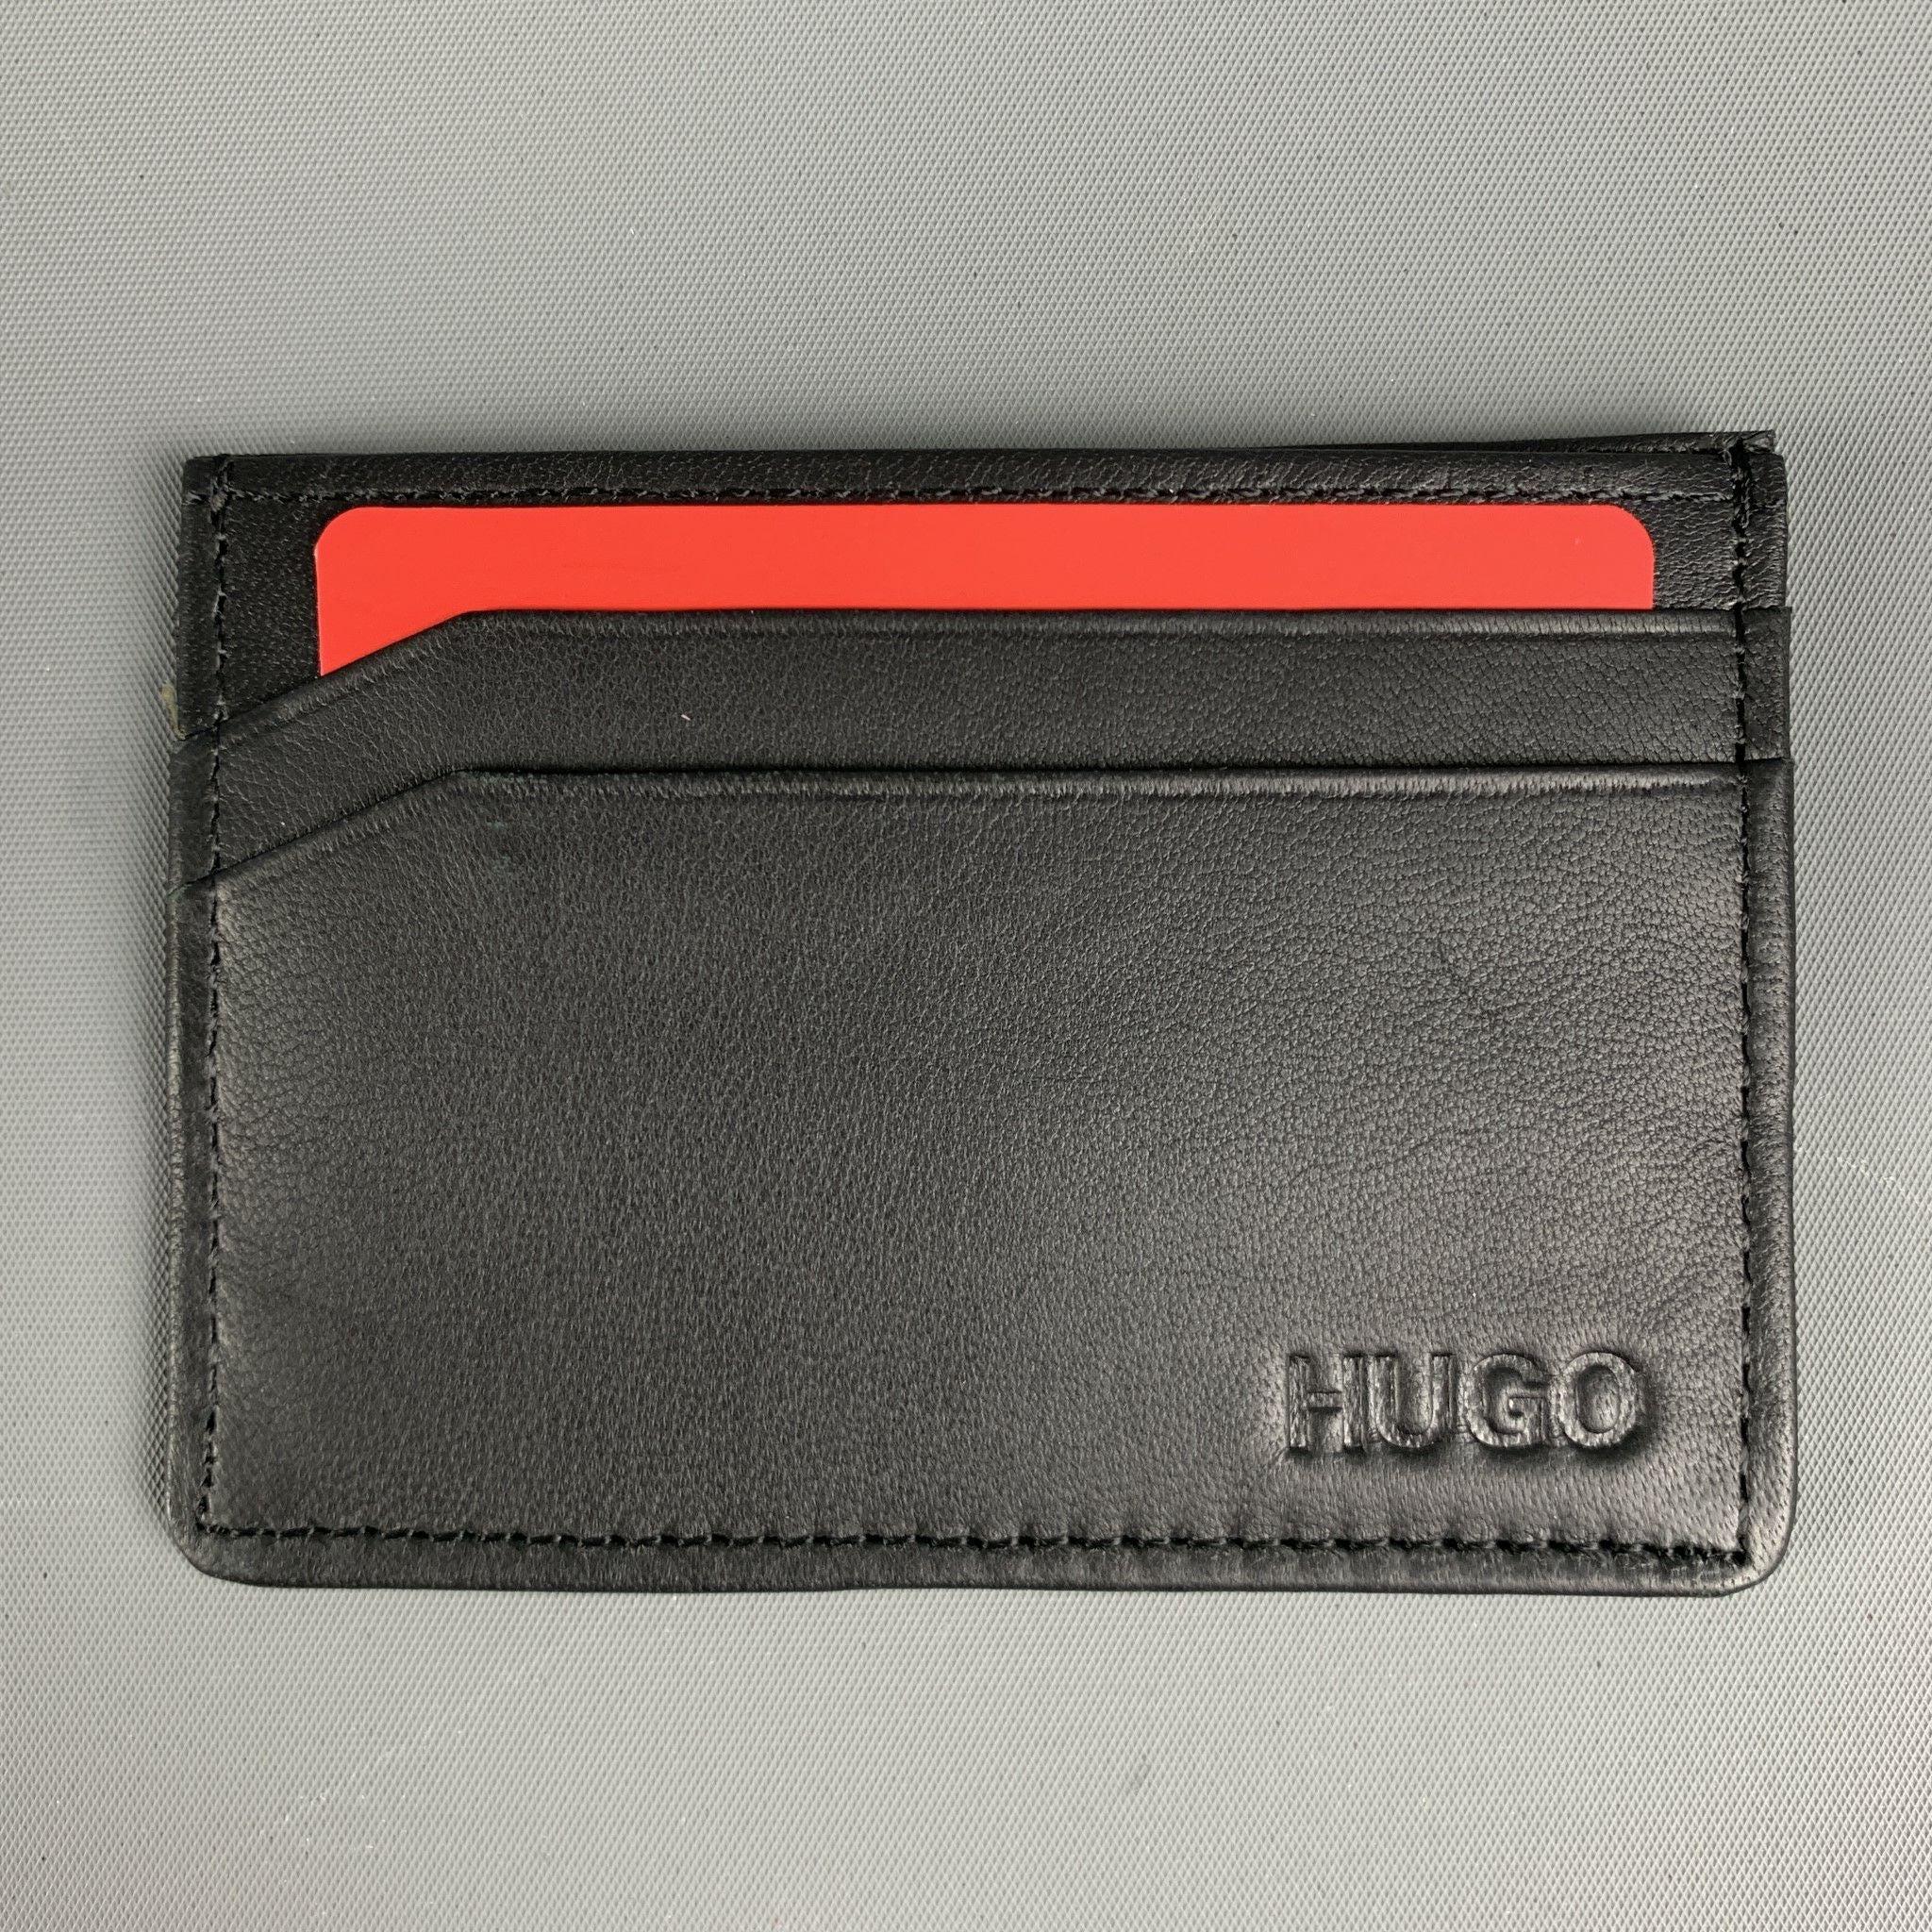 HUGO BOSS card holder case wallet comes in black smooth leather. Comes with Box.Excellent Pre-Owned Condition.4 x 3 inches 
  
  
 
Reference No.: 128073
Category: Wallet
More Details
    
Brand:  HUGO BOSS
Color:  Black
Type of Leather: 